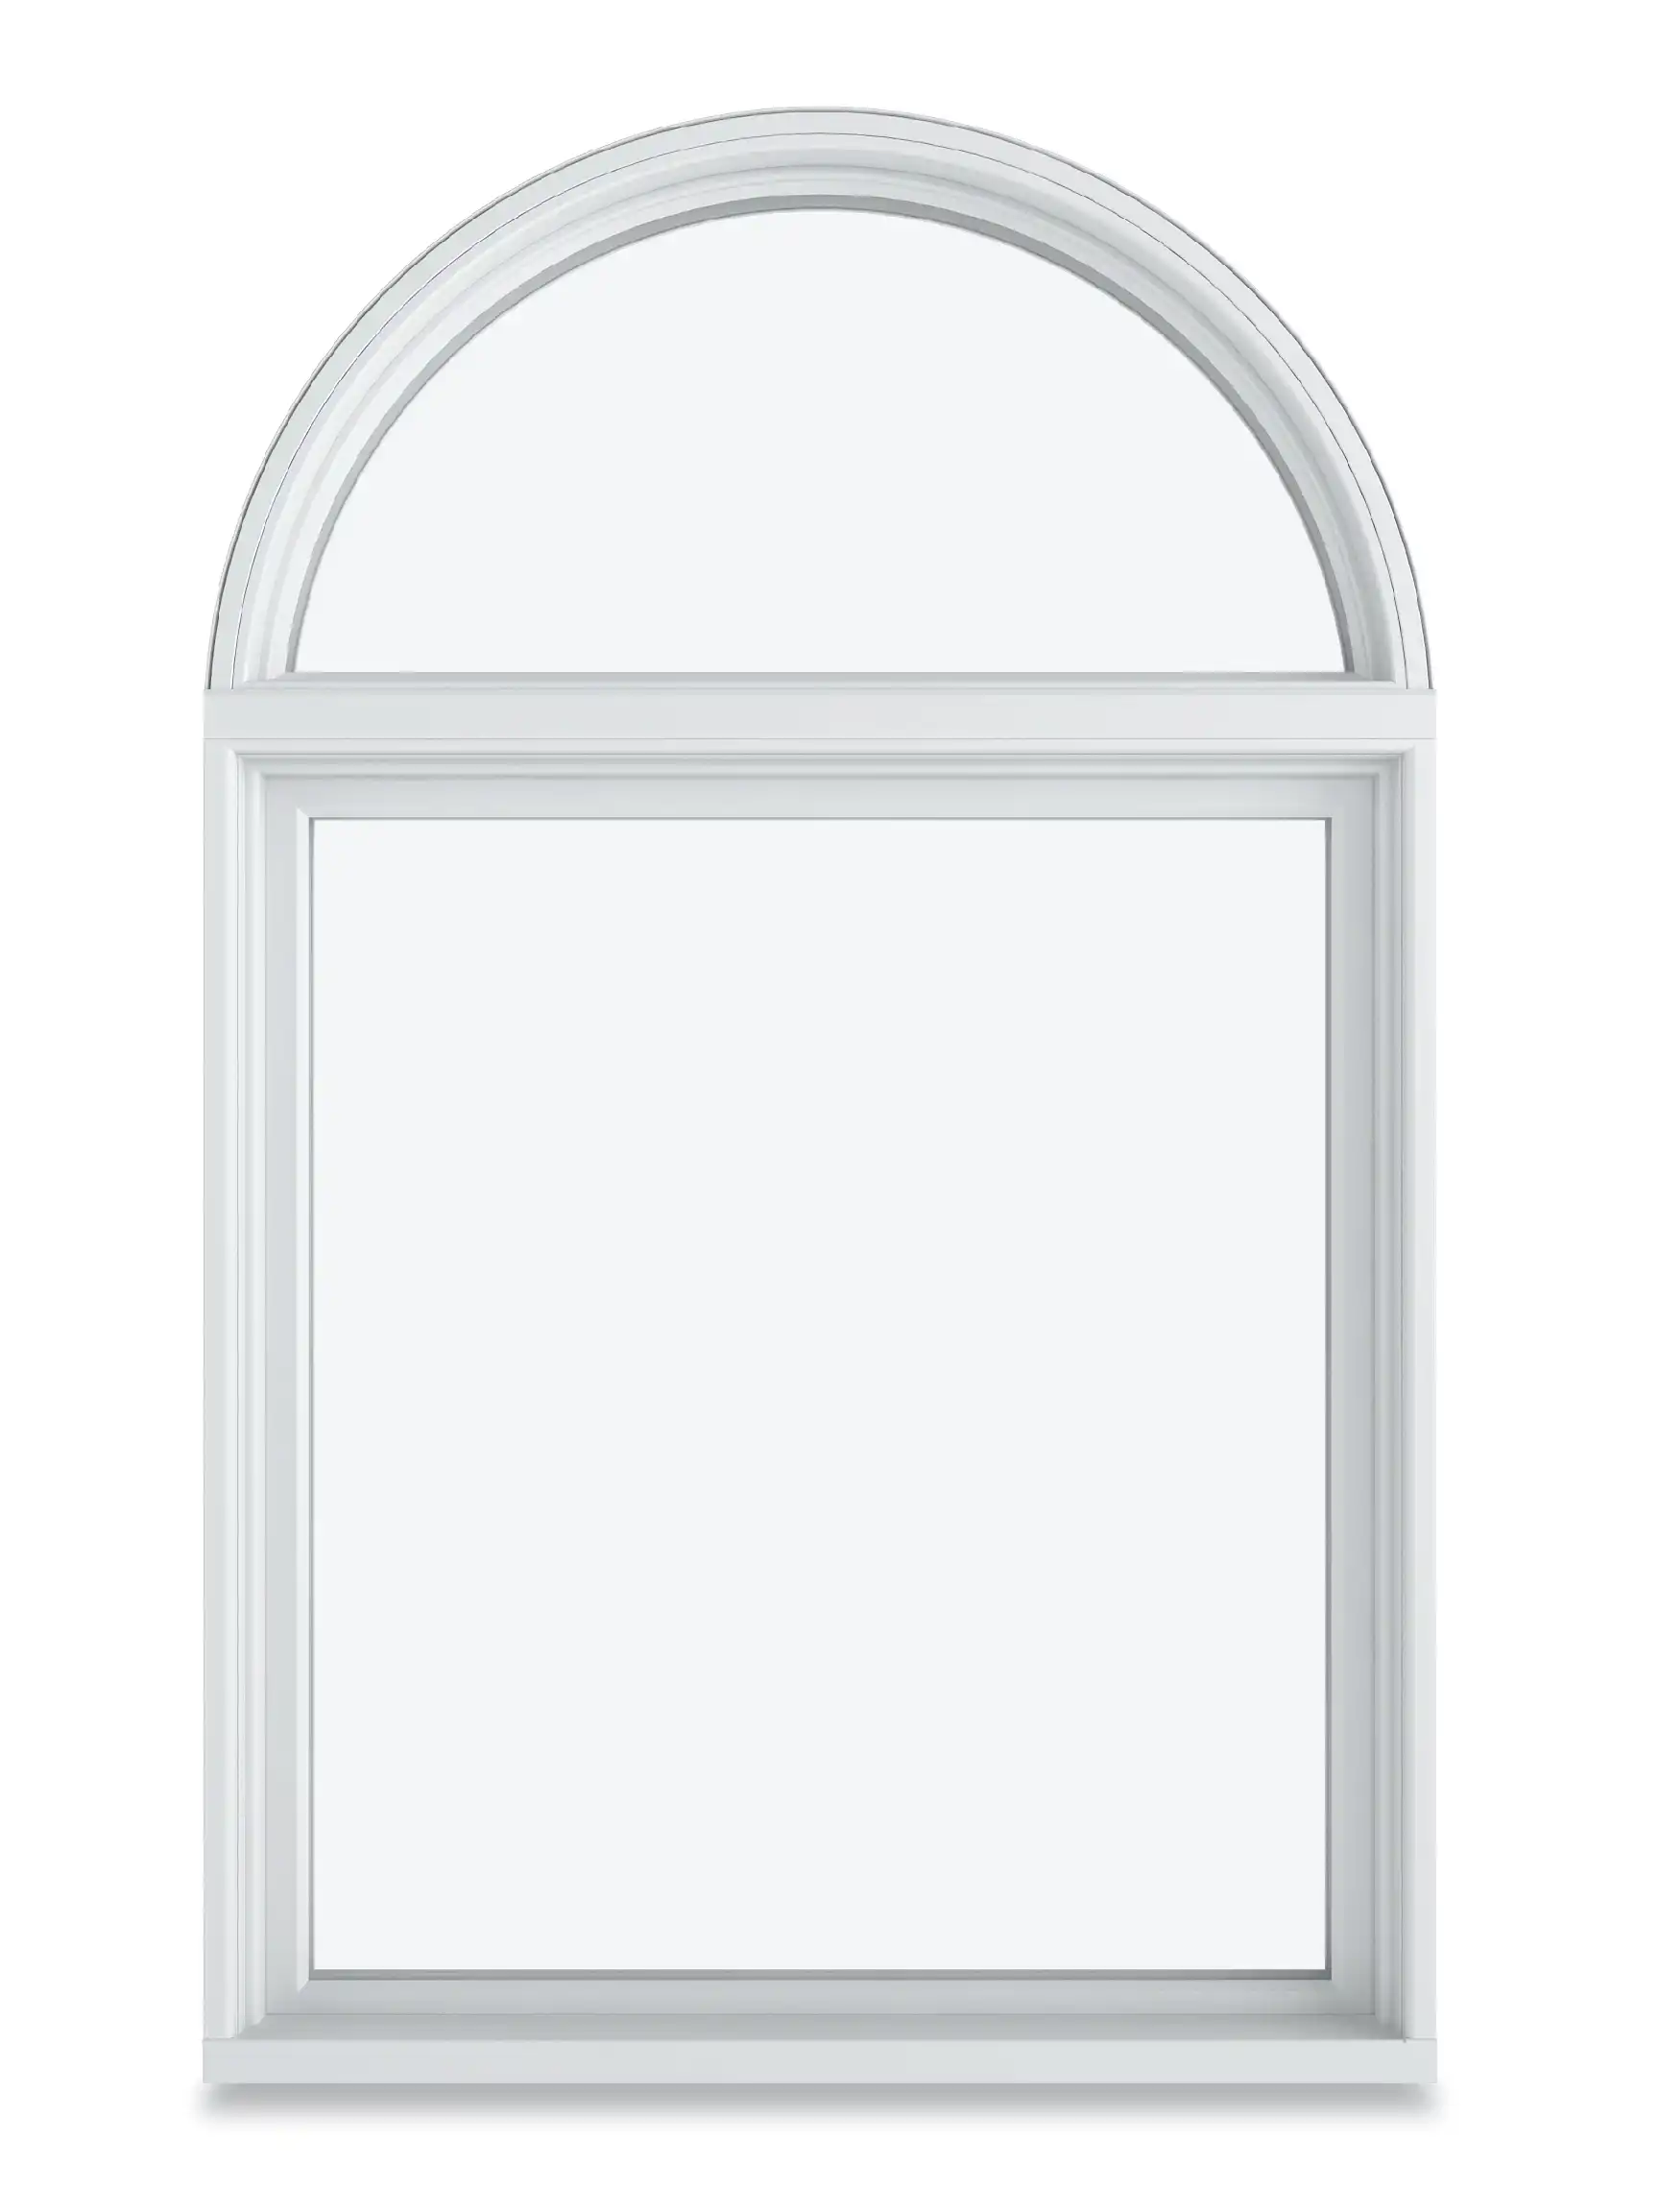 Image of a white Marvin Replacement Picture Window with a Half Round Window above it.